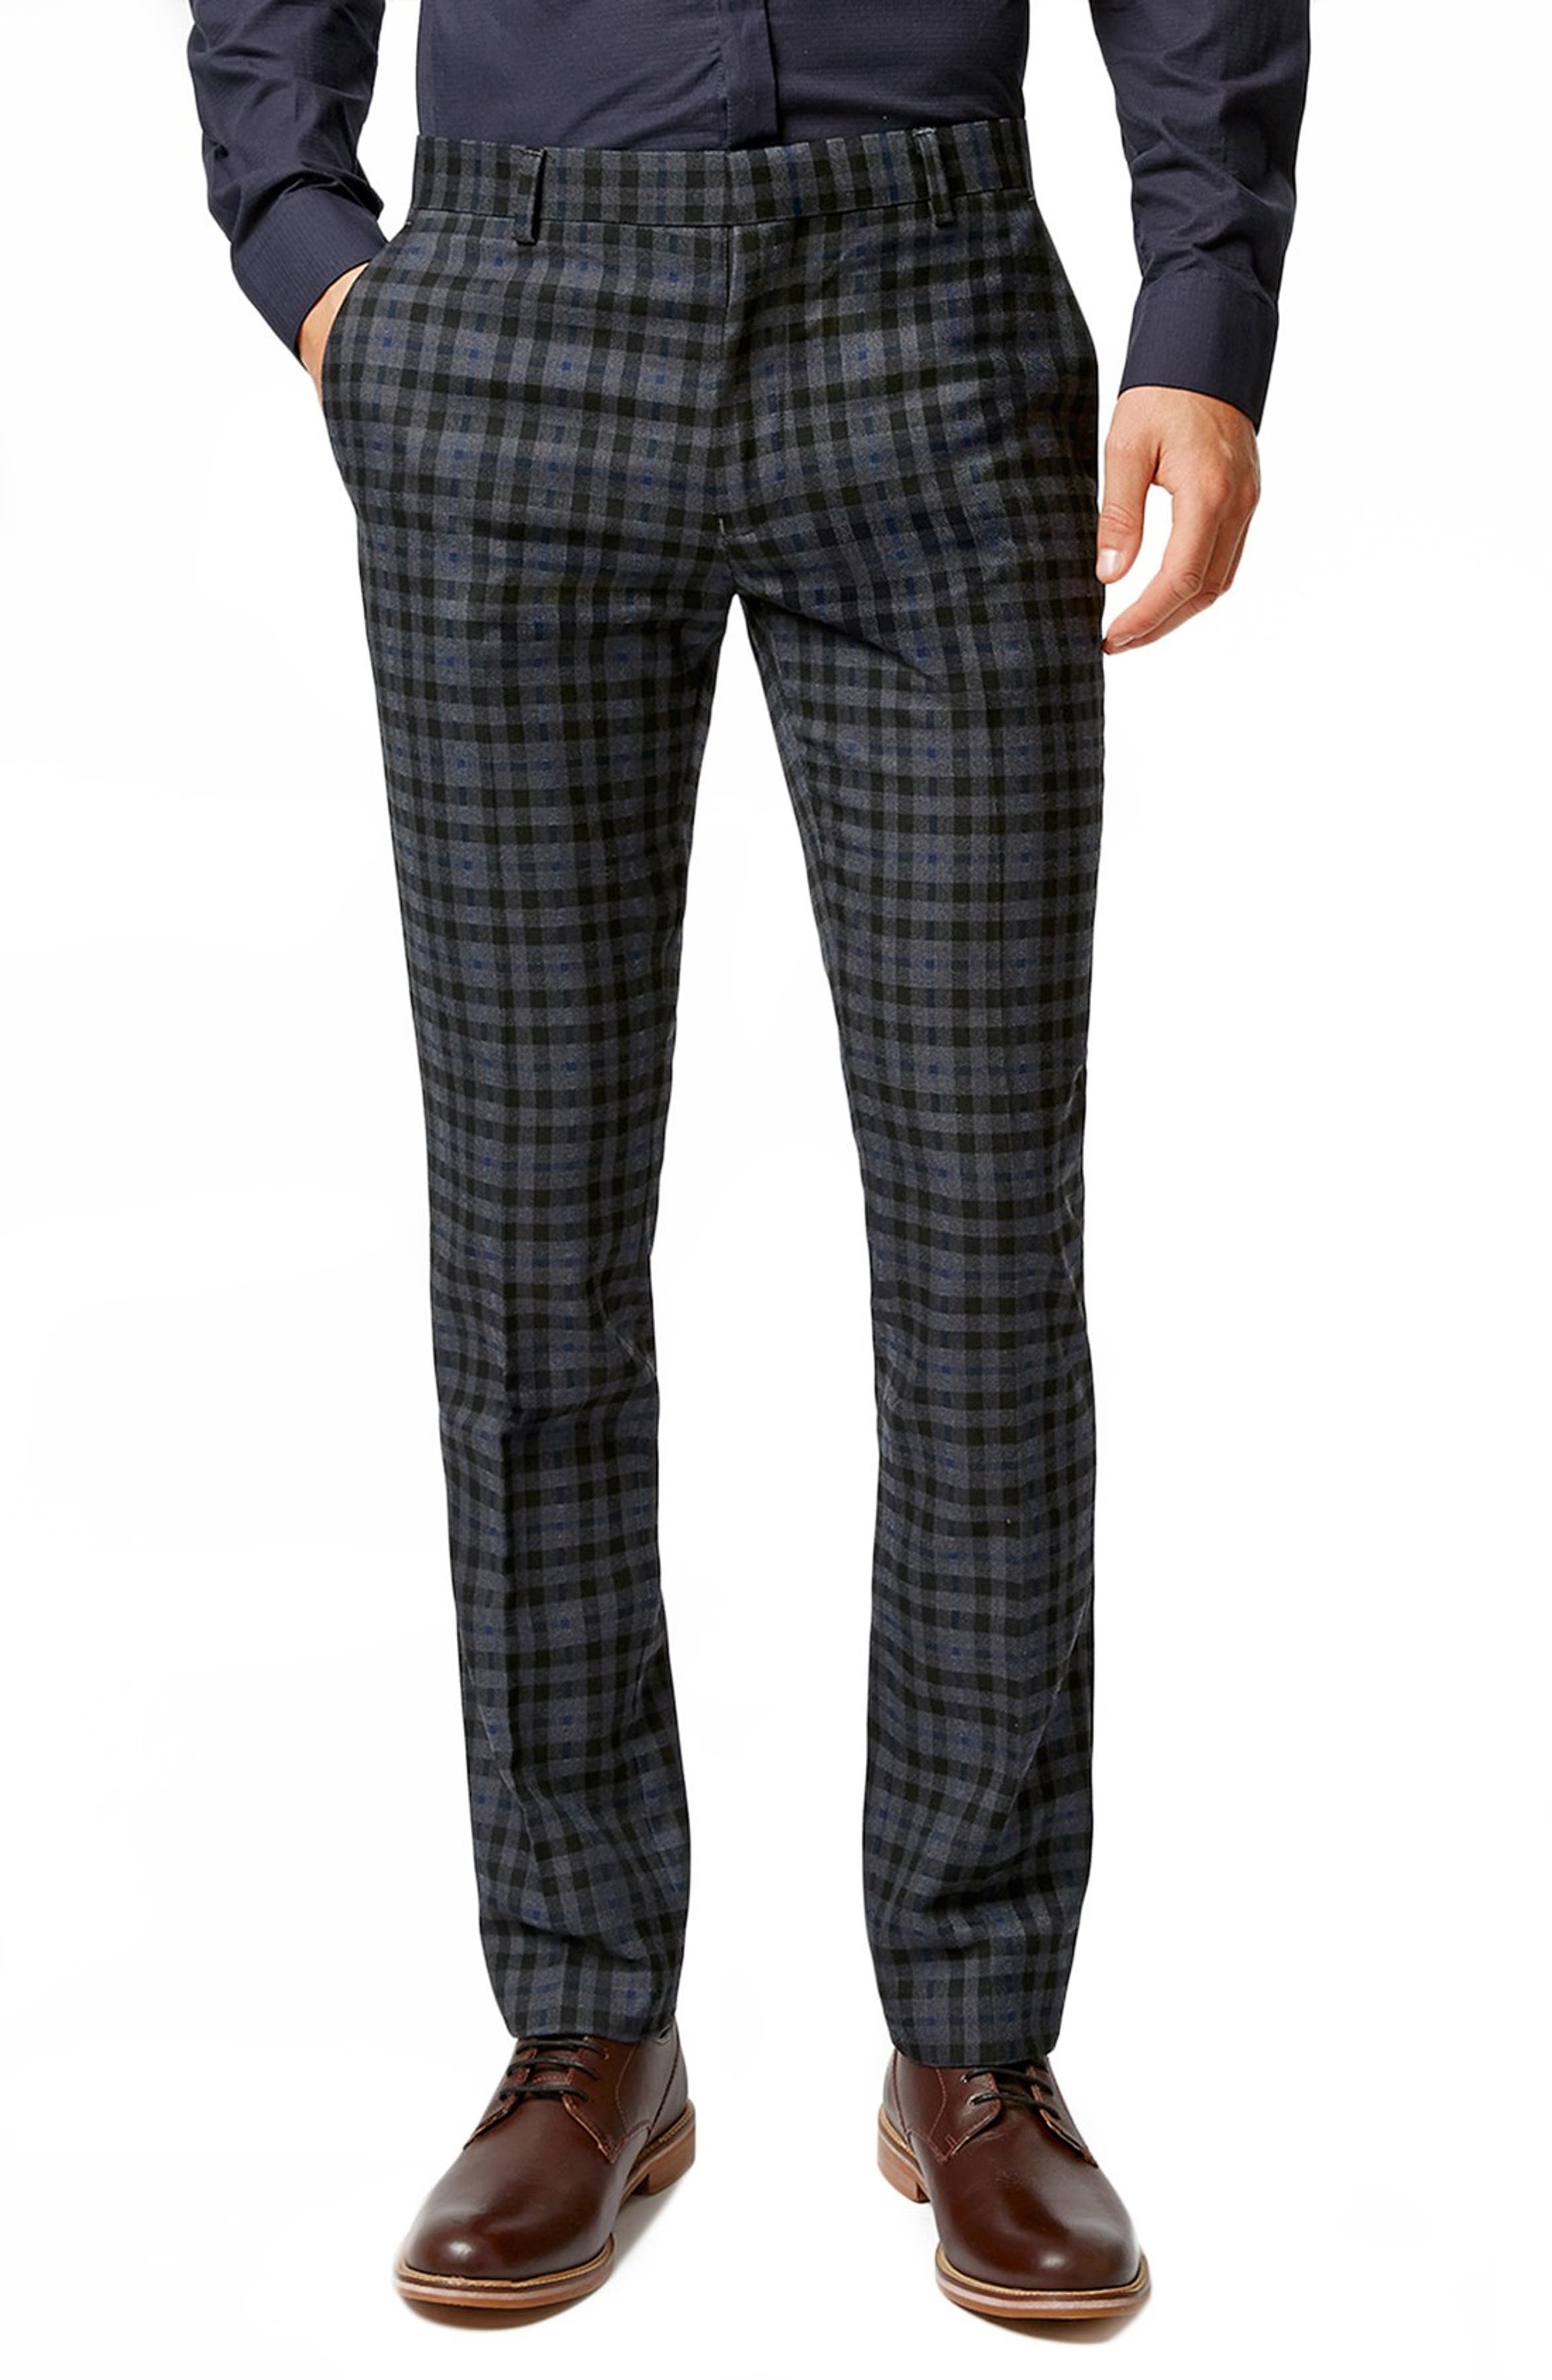 Topman Skinny Fit Gingham Check Suit Trousers | Nordstrom